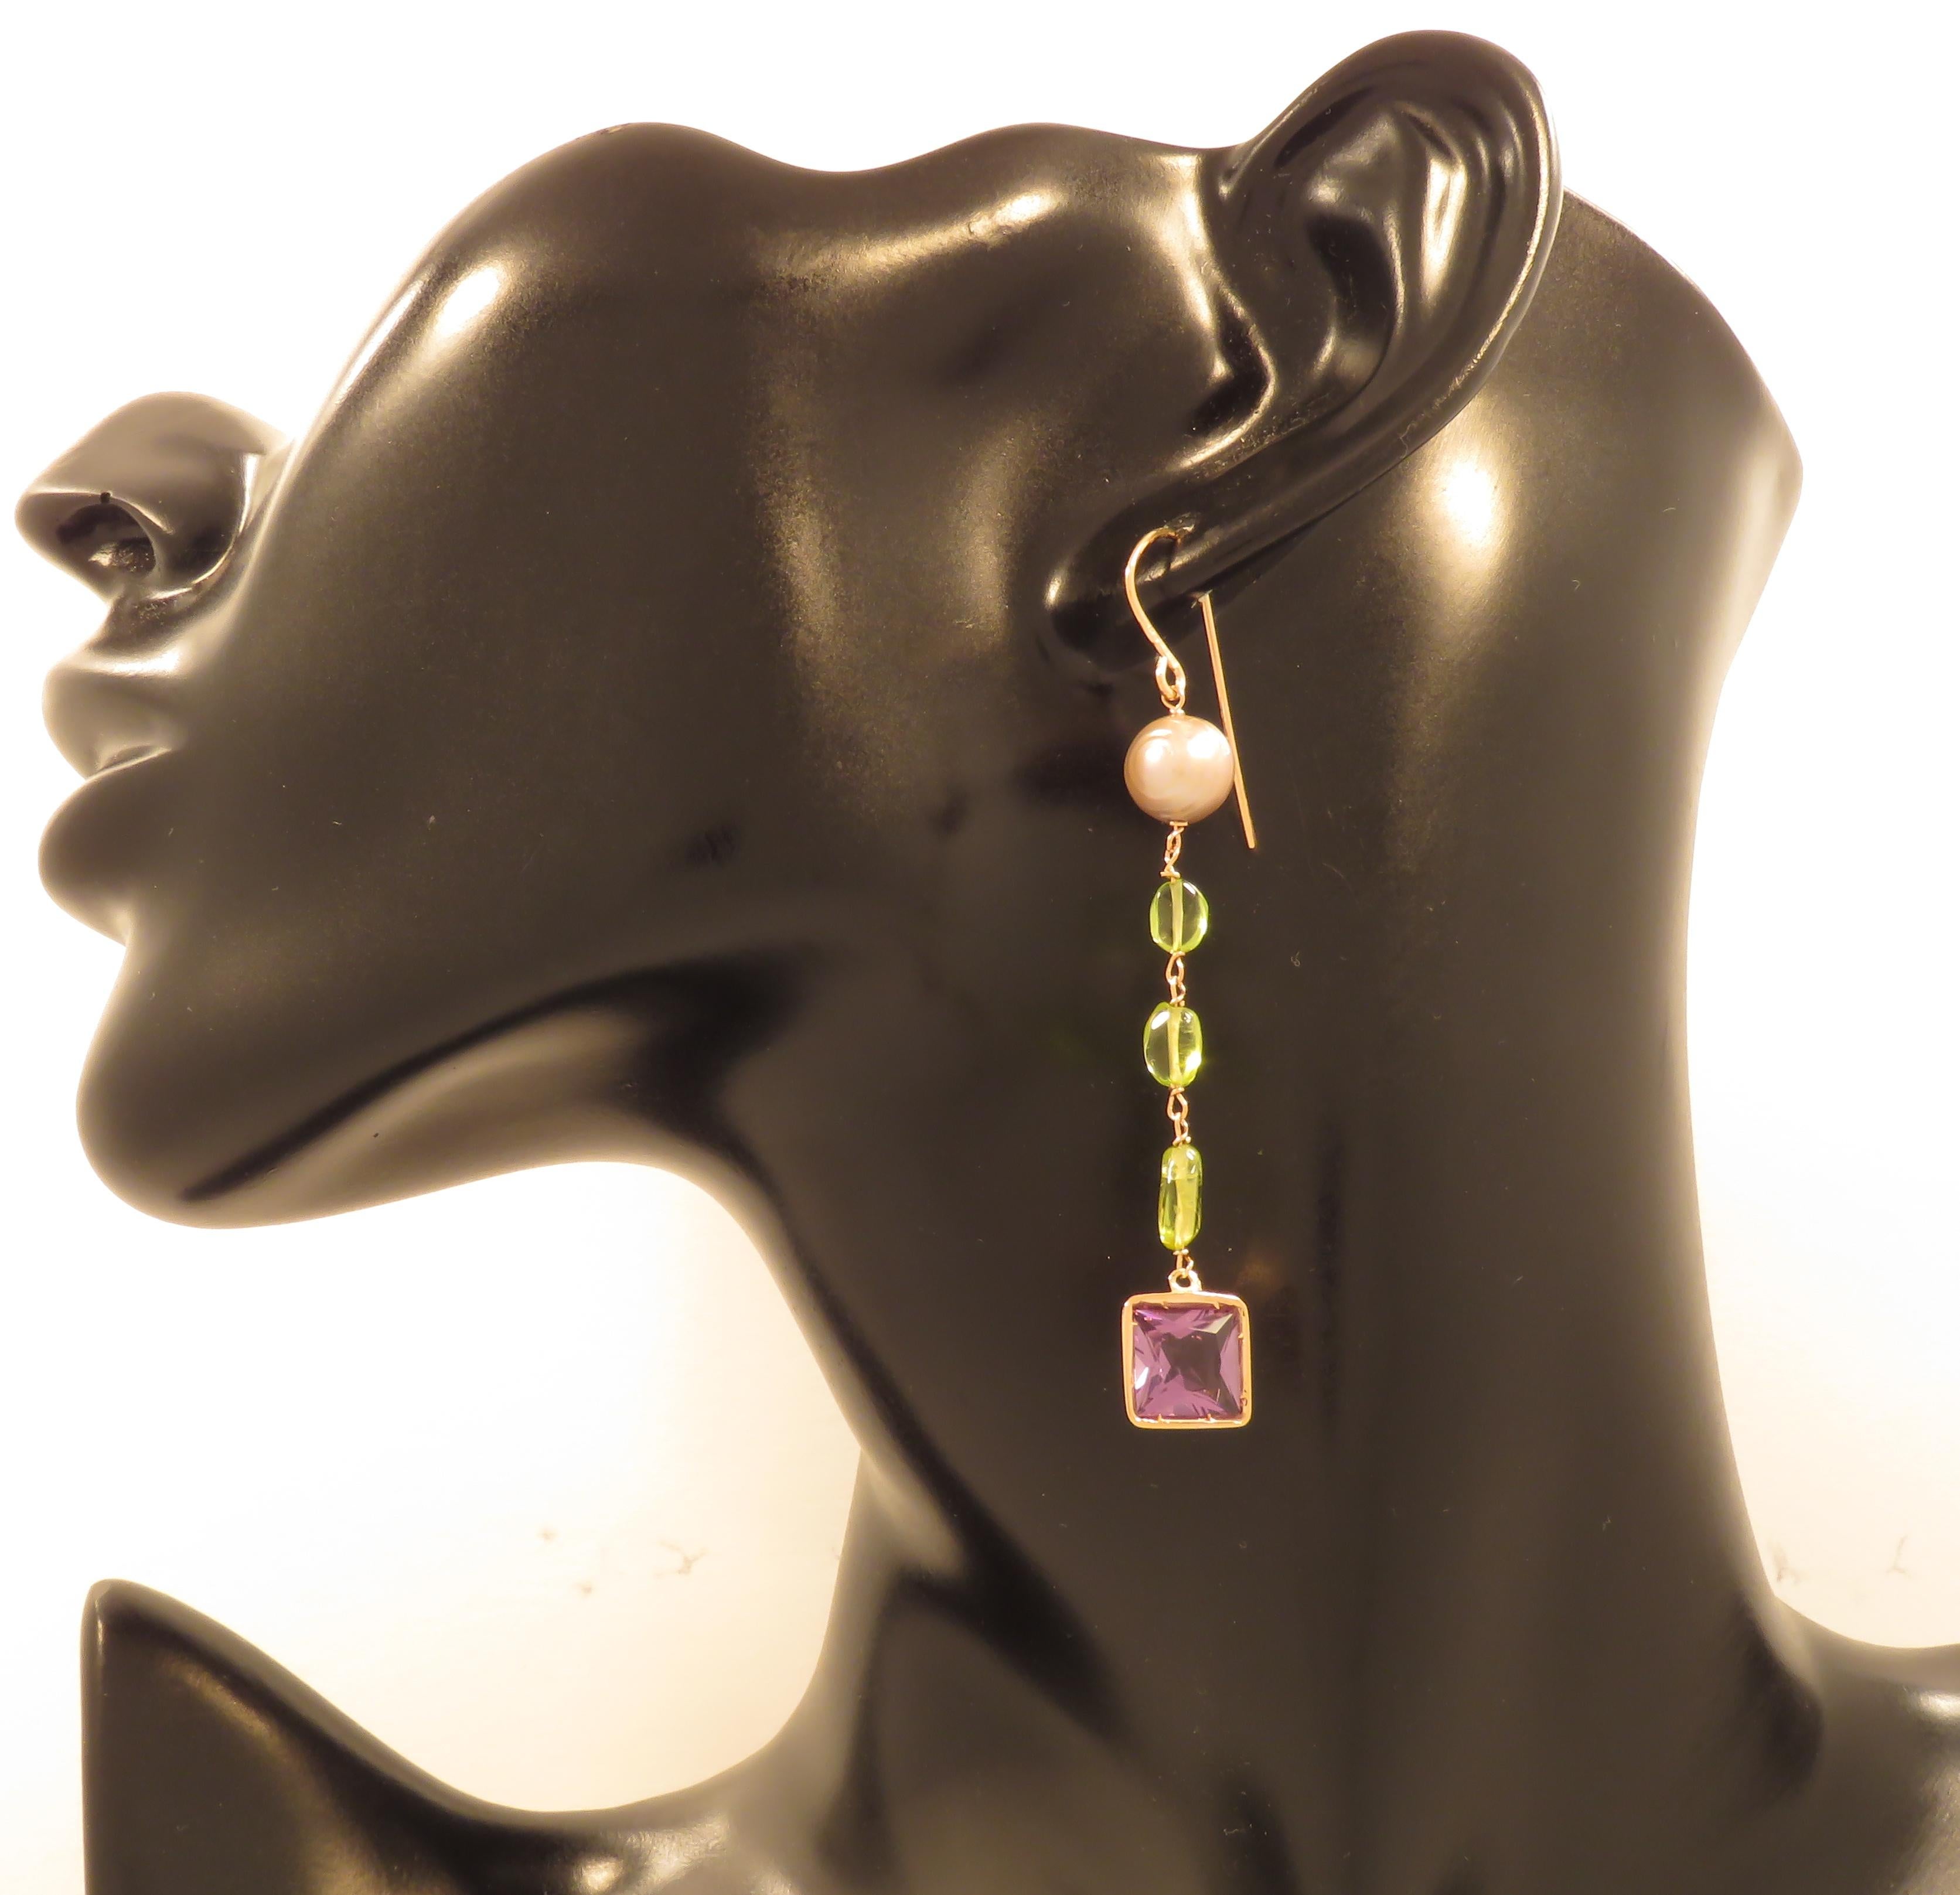 Lovely dangle earrings with square cut amethyst, 6 nugget cut peridot and 2 freshwater pearls. Crafted in 9 karat rose gold. The length of each earring is 65 mm / 2.559 inches. Marked with the Italian gold mark 375 and Botta Gioielli brandmark